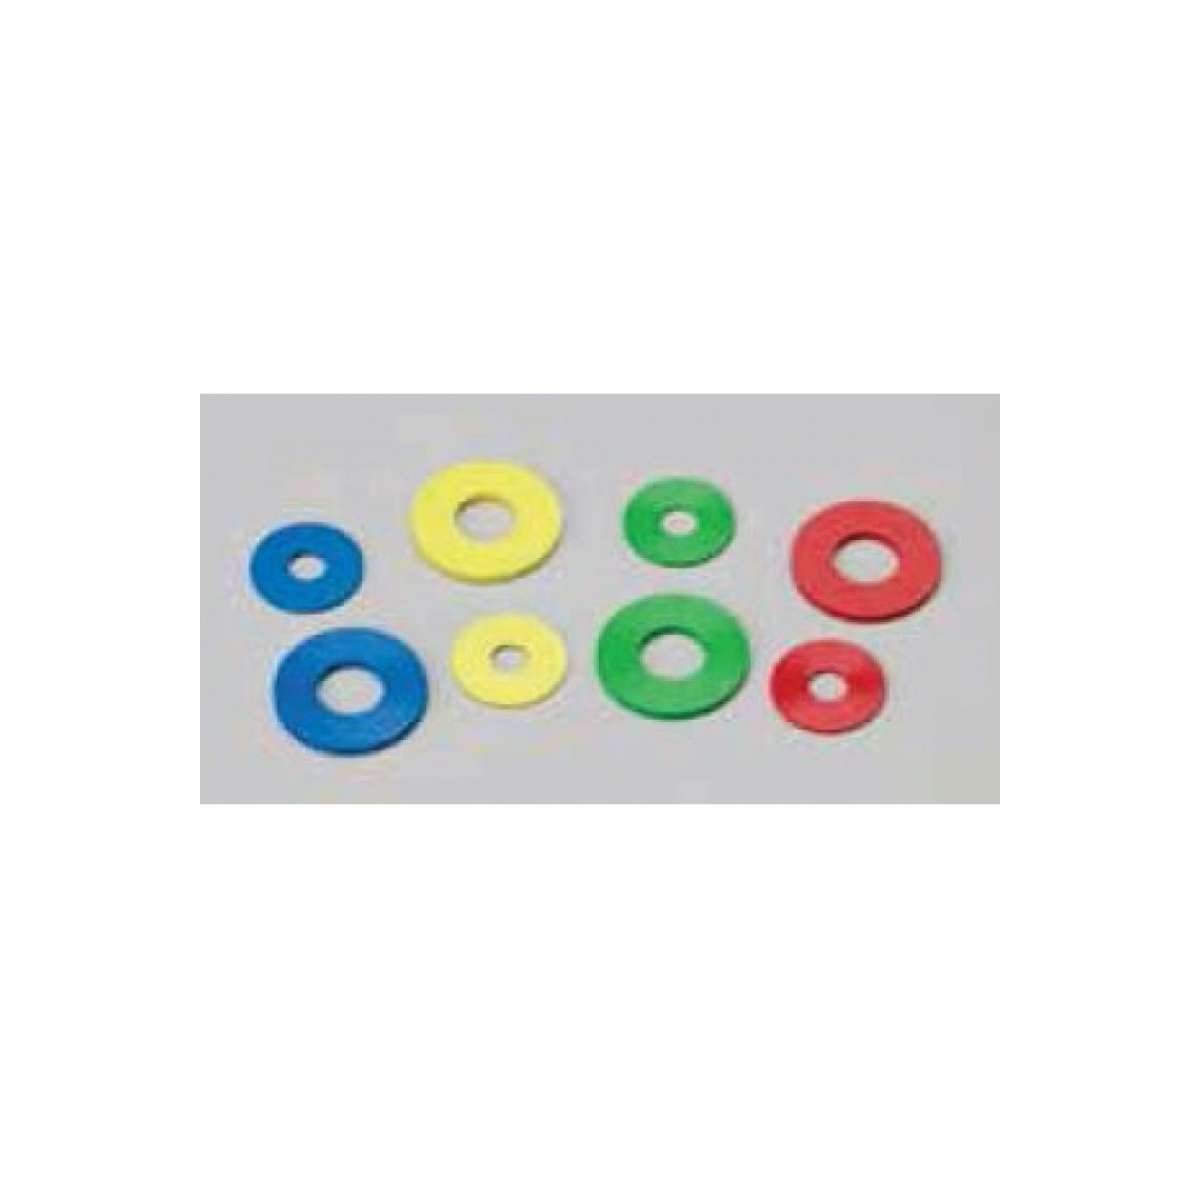 Grease Fitting Washer - 1/4-28 - Blue